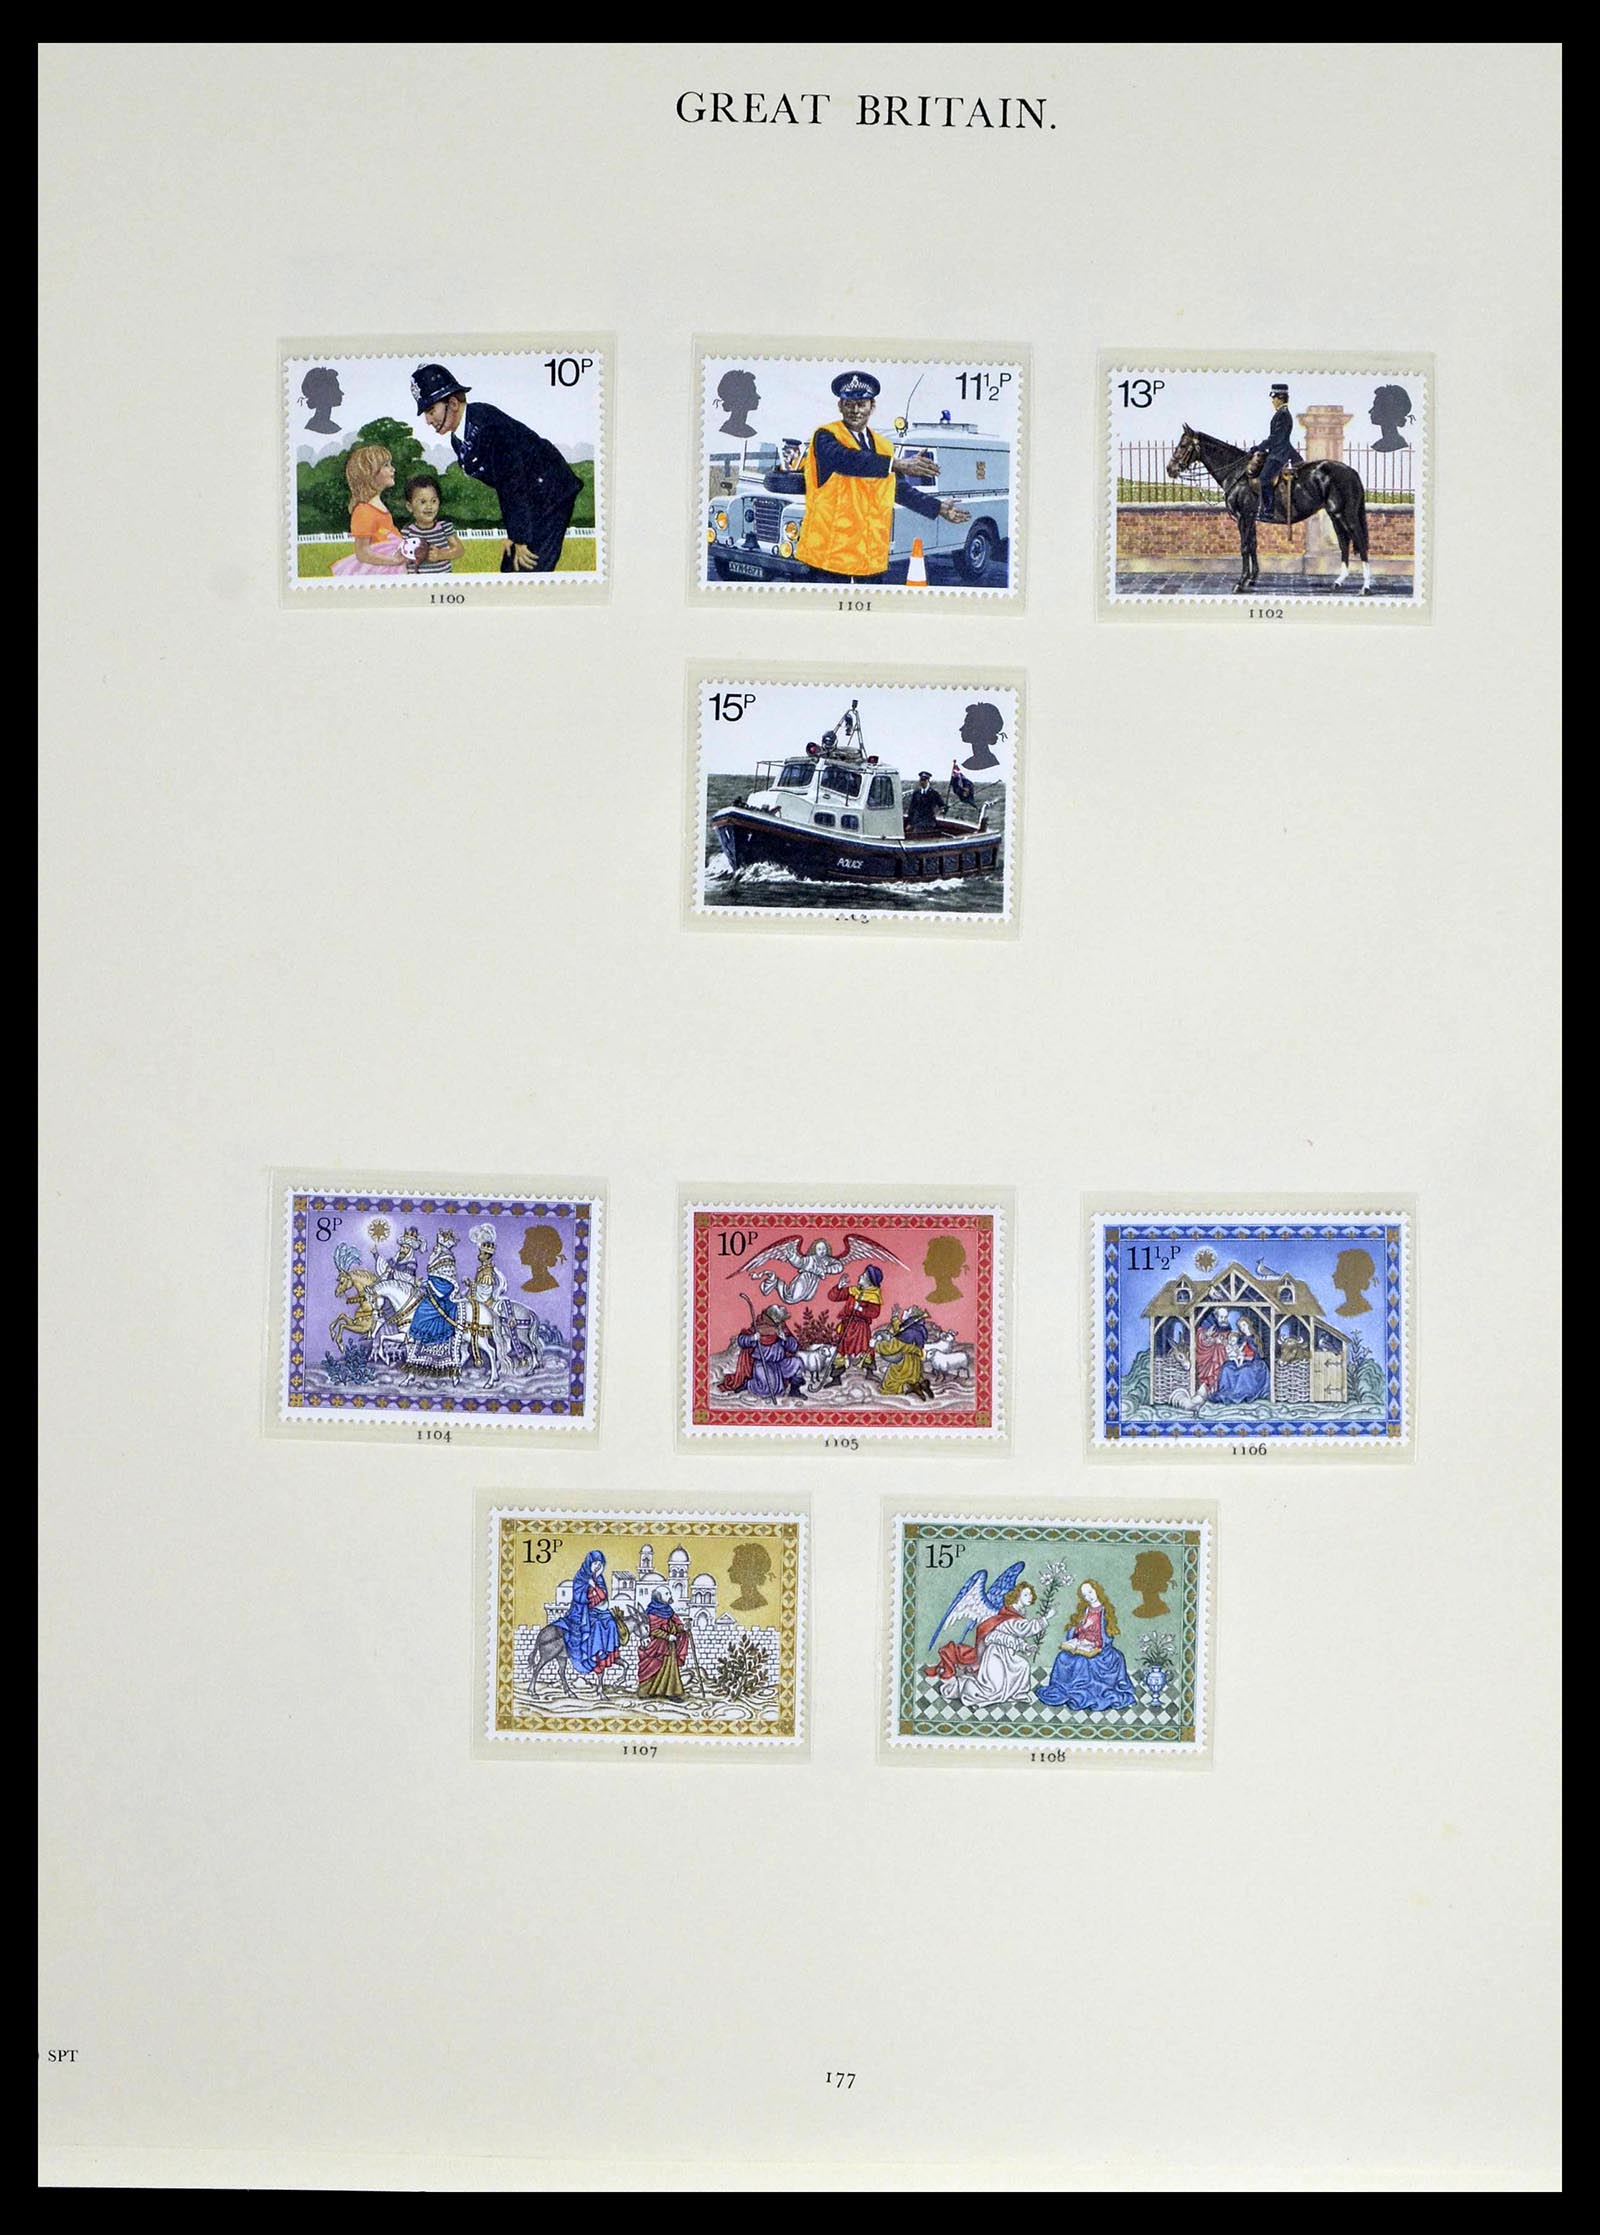 39025 0084 - Stamp collection 39025 Great Britain specialised 1840-1990.